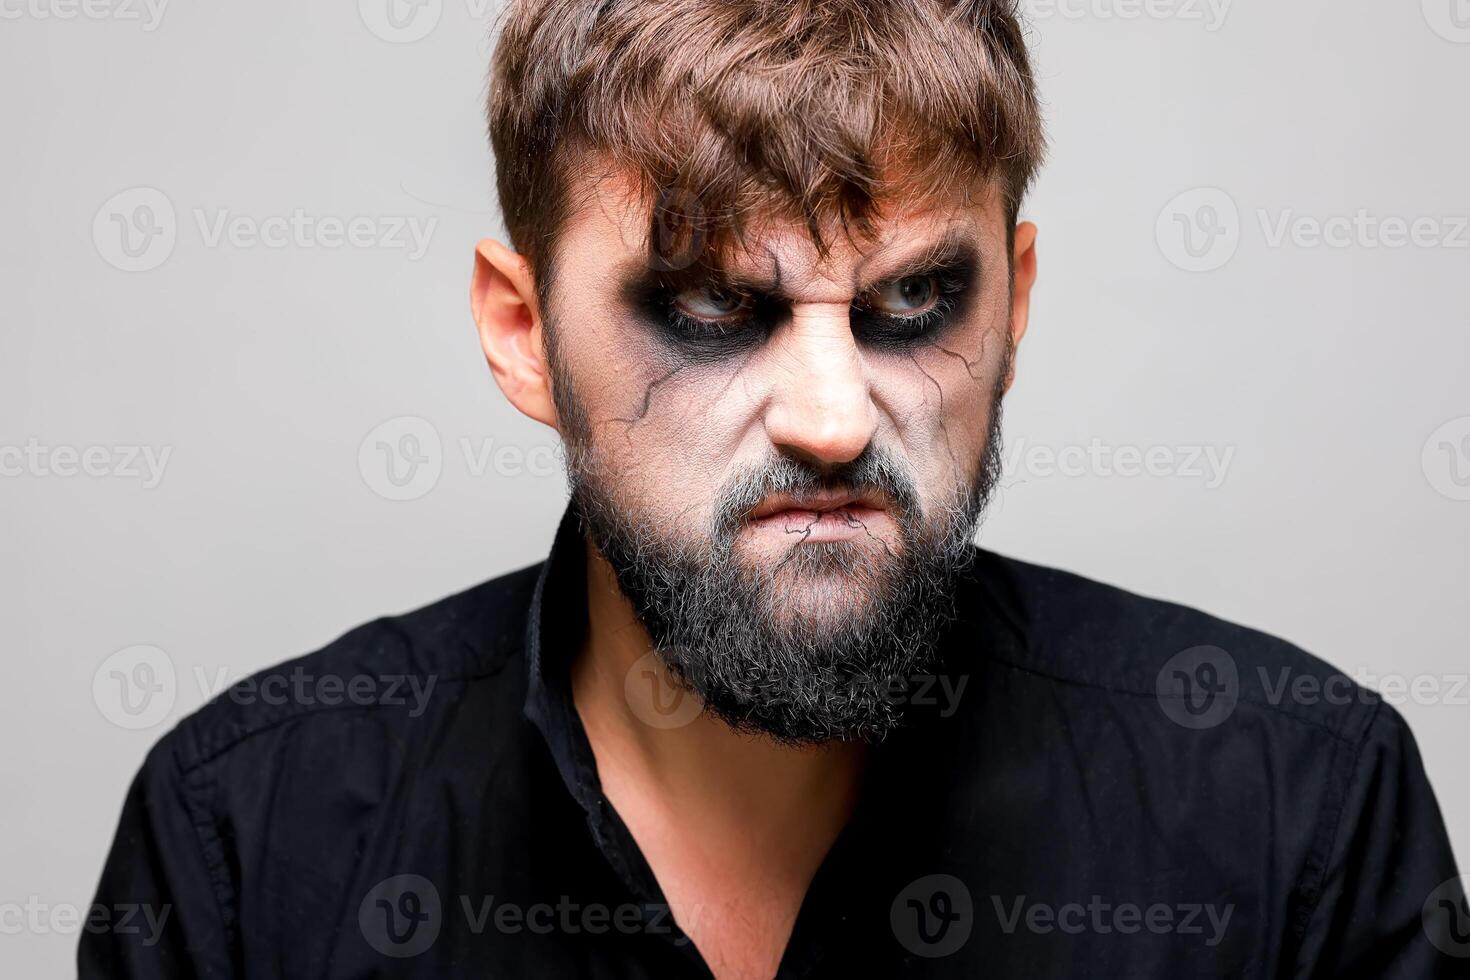 Portrait of a man with a beard and a menacing look with undead-style makeup on All Saints' Day on October 31 photo